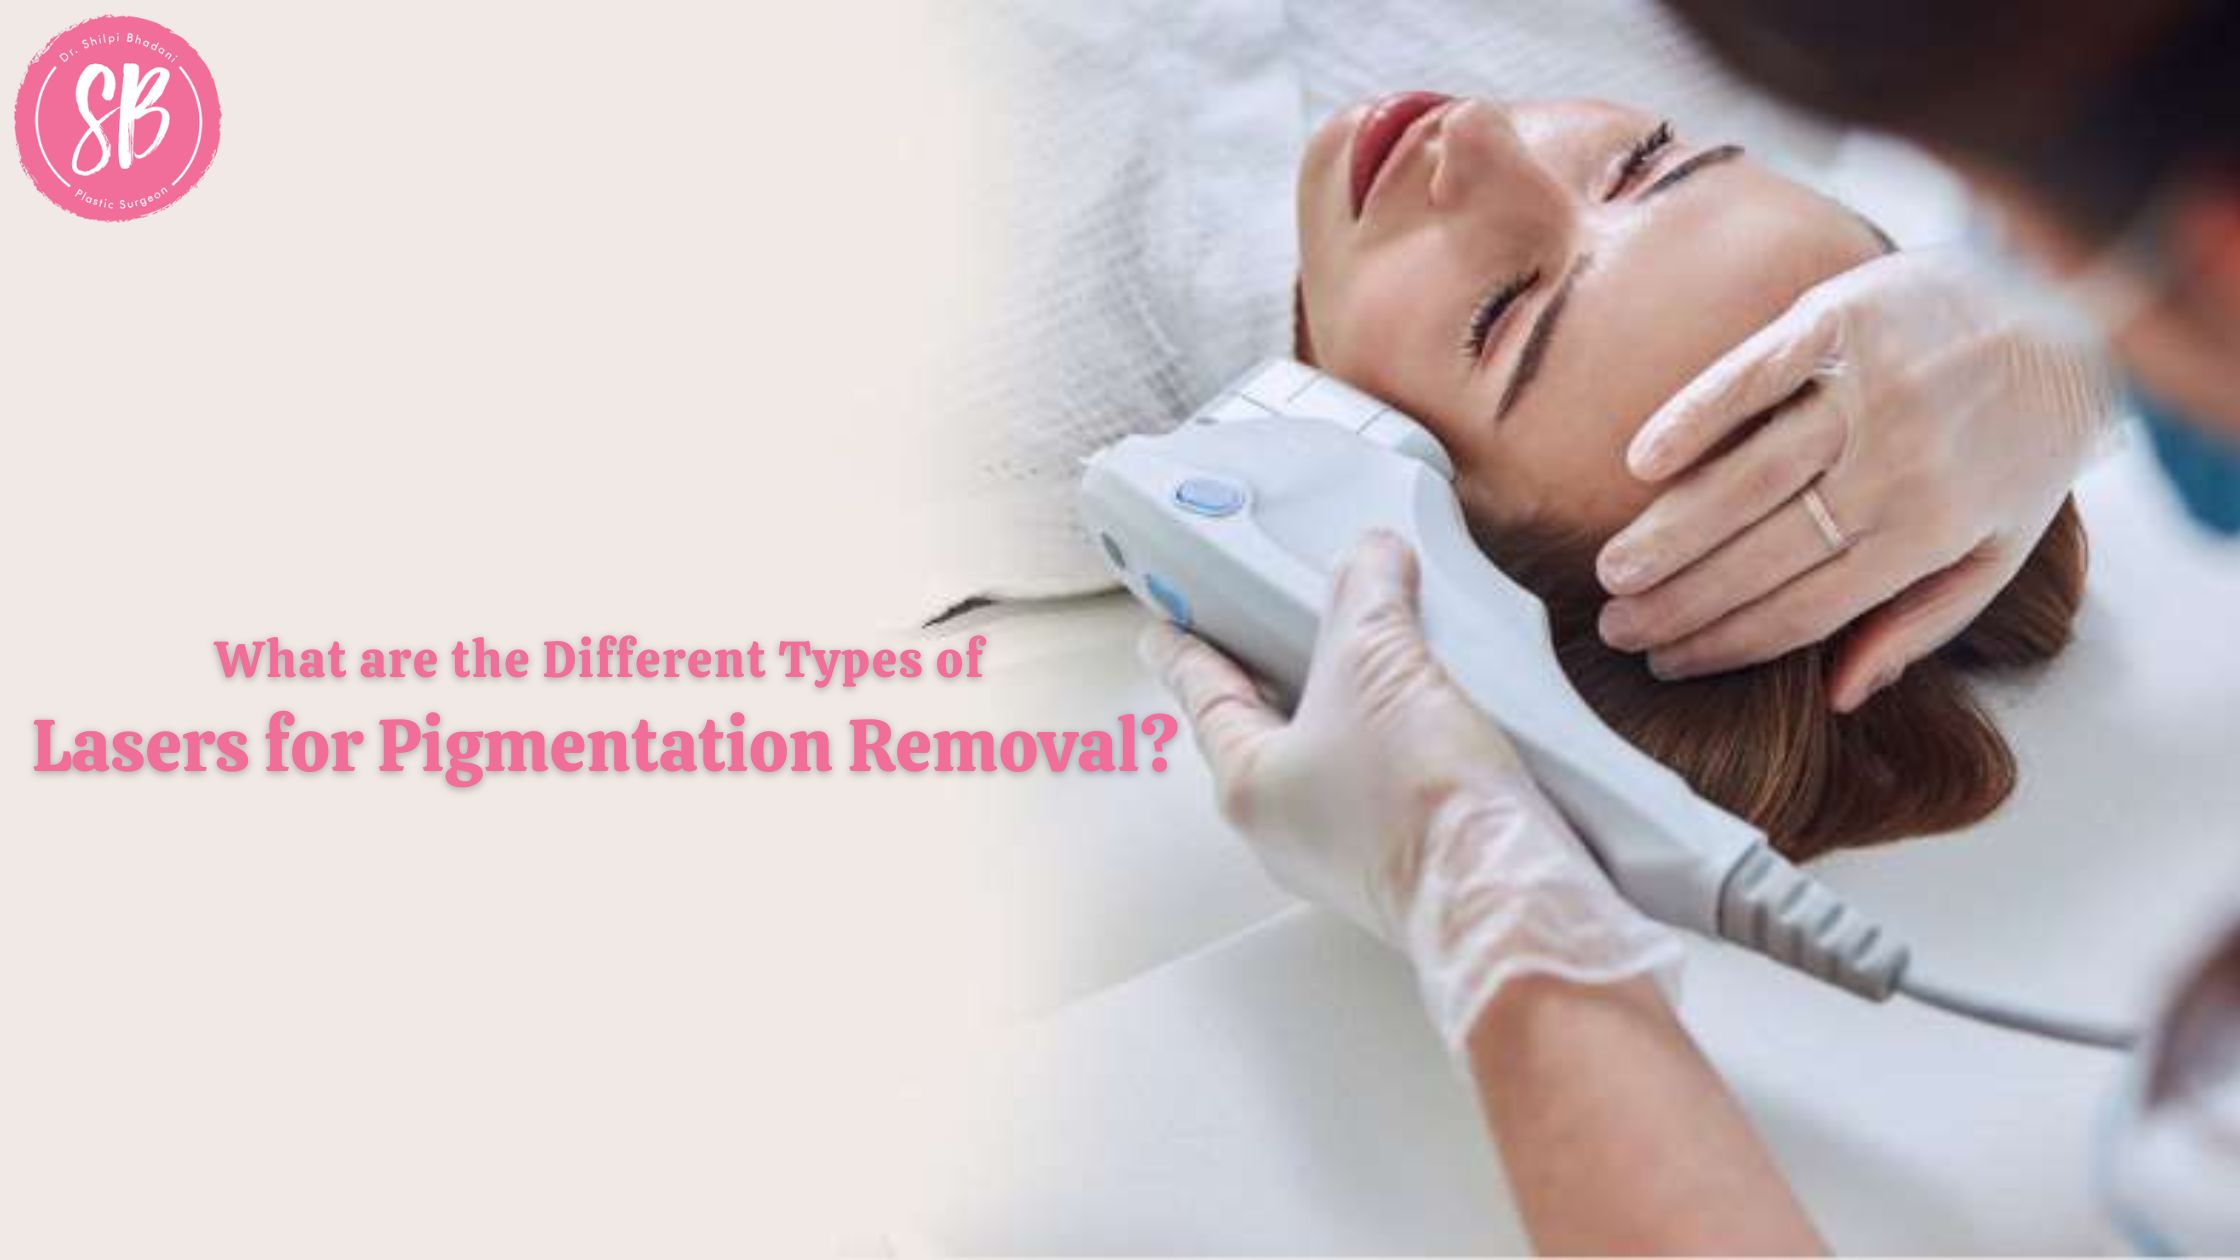 What are the Different Types of Lasers for Pigmentation Removal